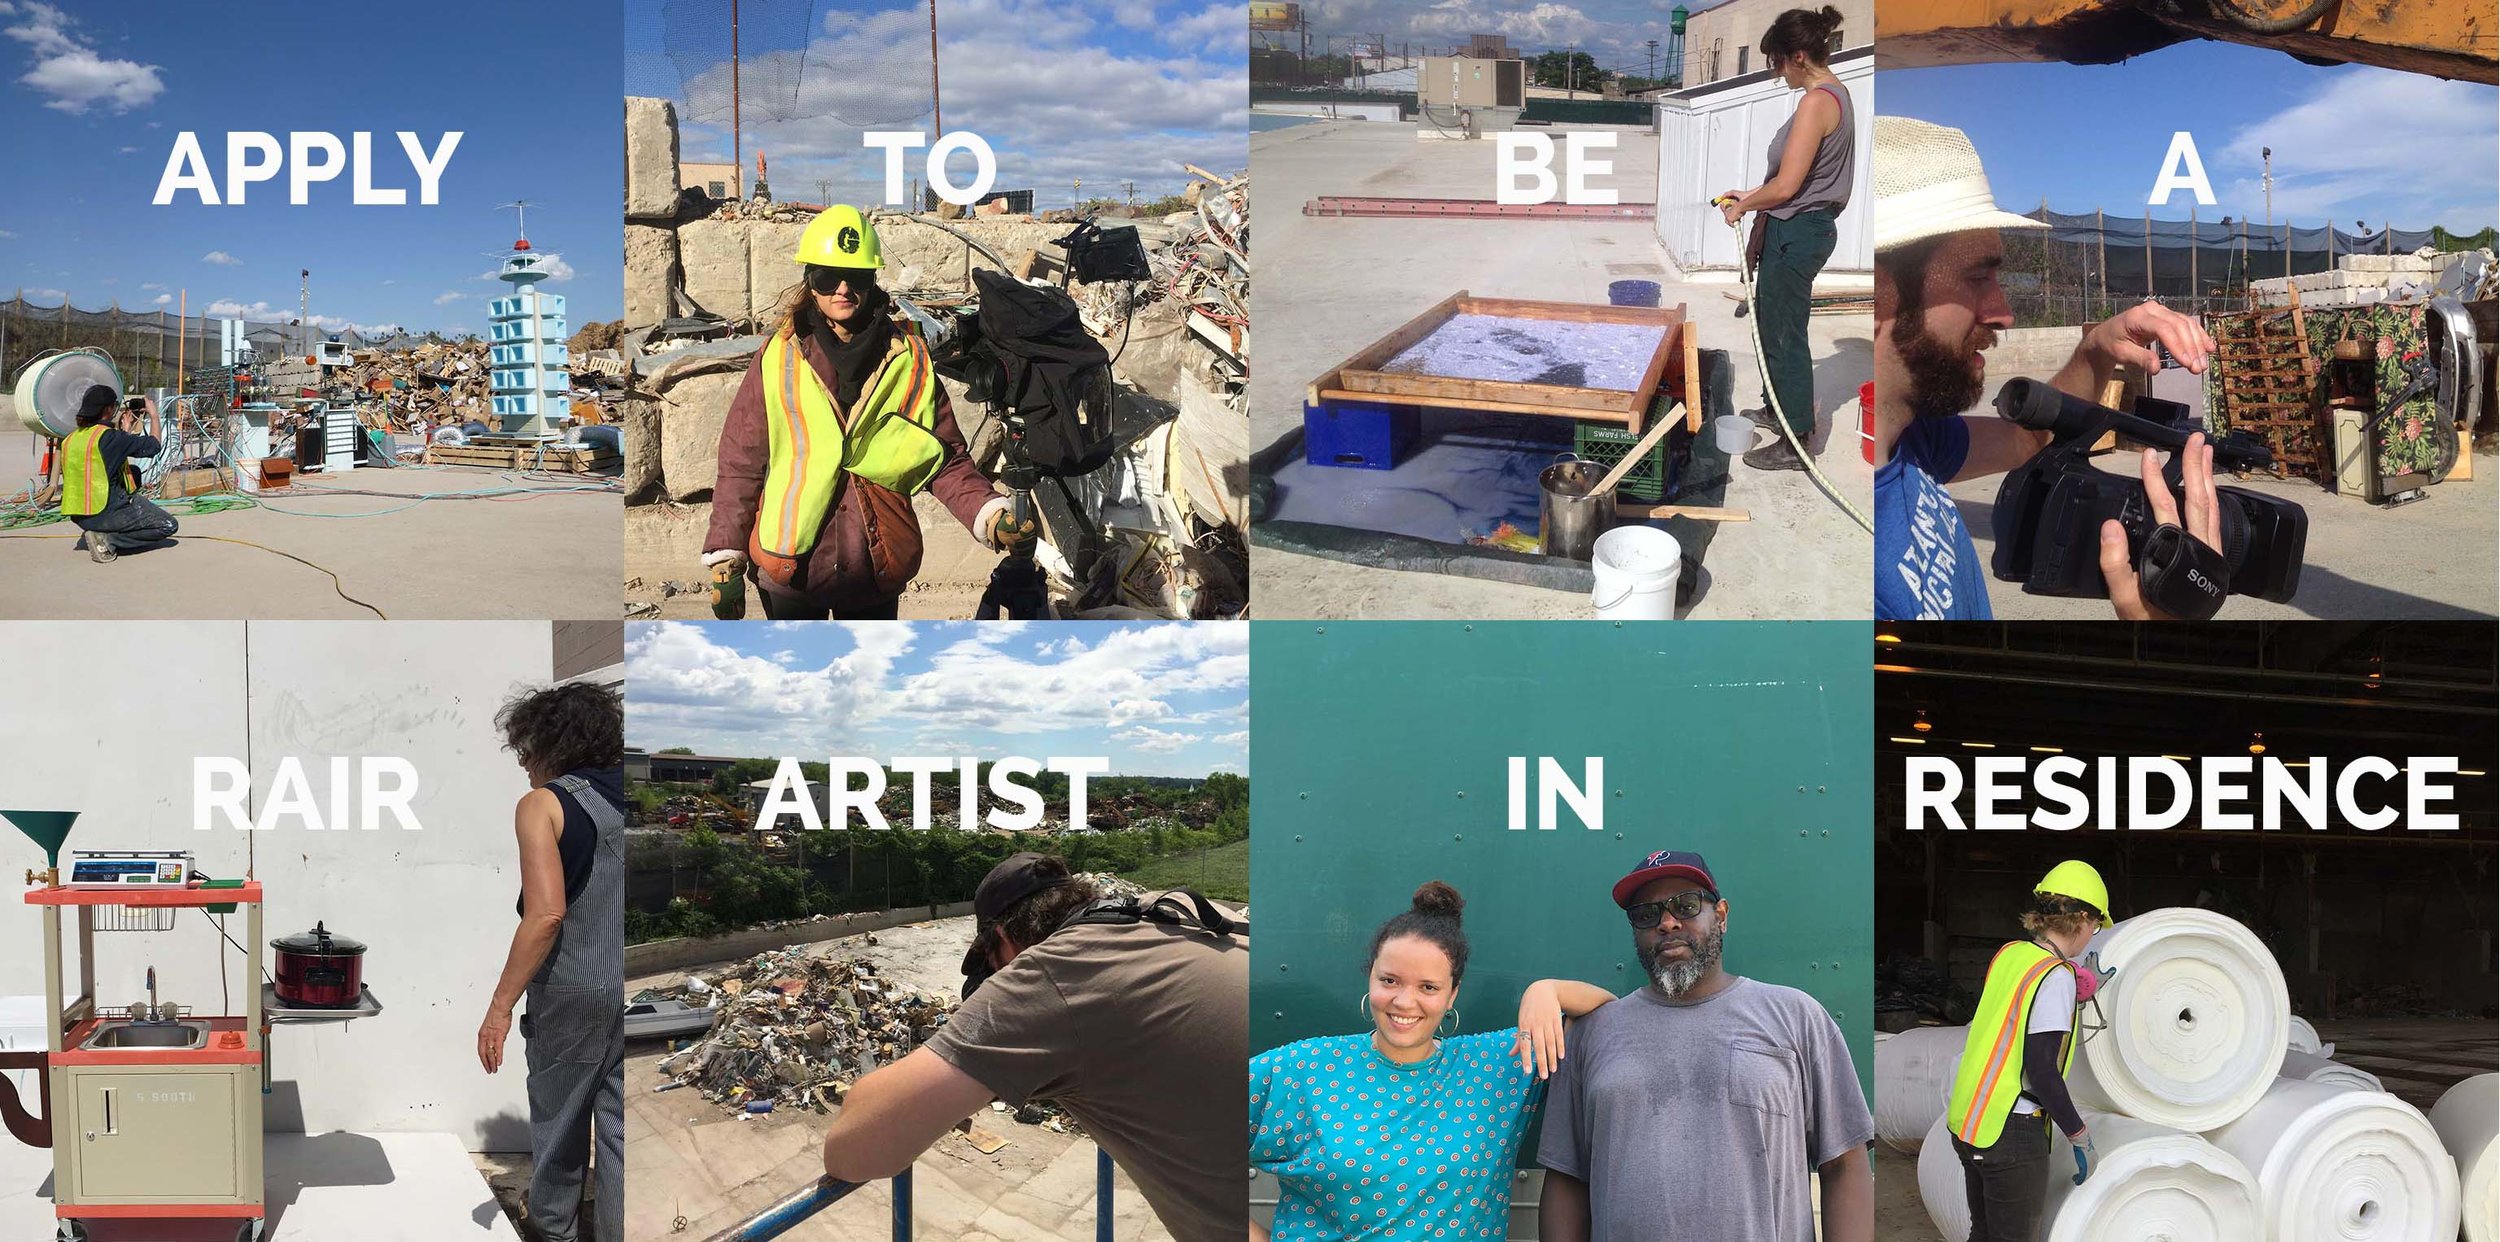 RAIR’S FLAGSHIP RESIDENCY PROGRAM HAS ESTABLISHED ITSELF AS A UNIQUE OPPORTUNITY FOR EMERGING, MID-CAREER AND ESTABLISHED ARTISTS TO WORK AT THE INTERSECTION OF ART, INDUSTRY, AND SUSTAINABILITY.